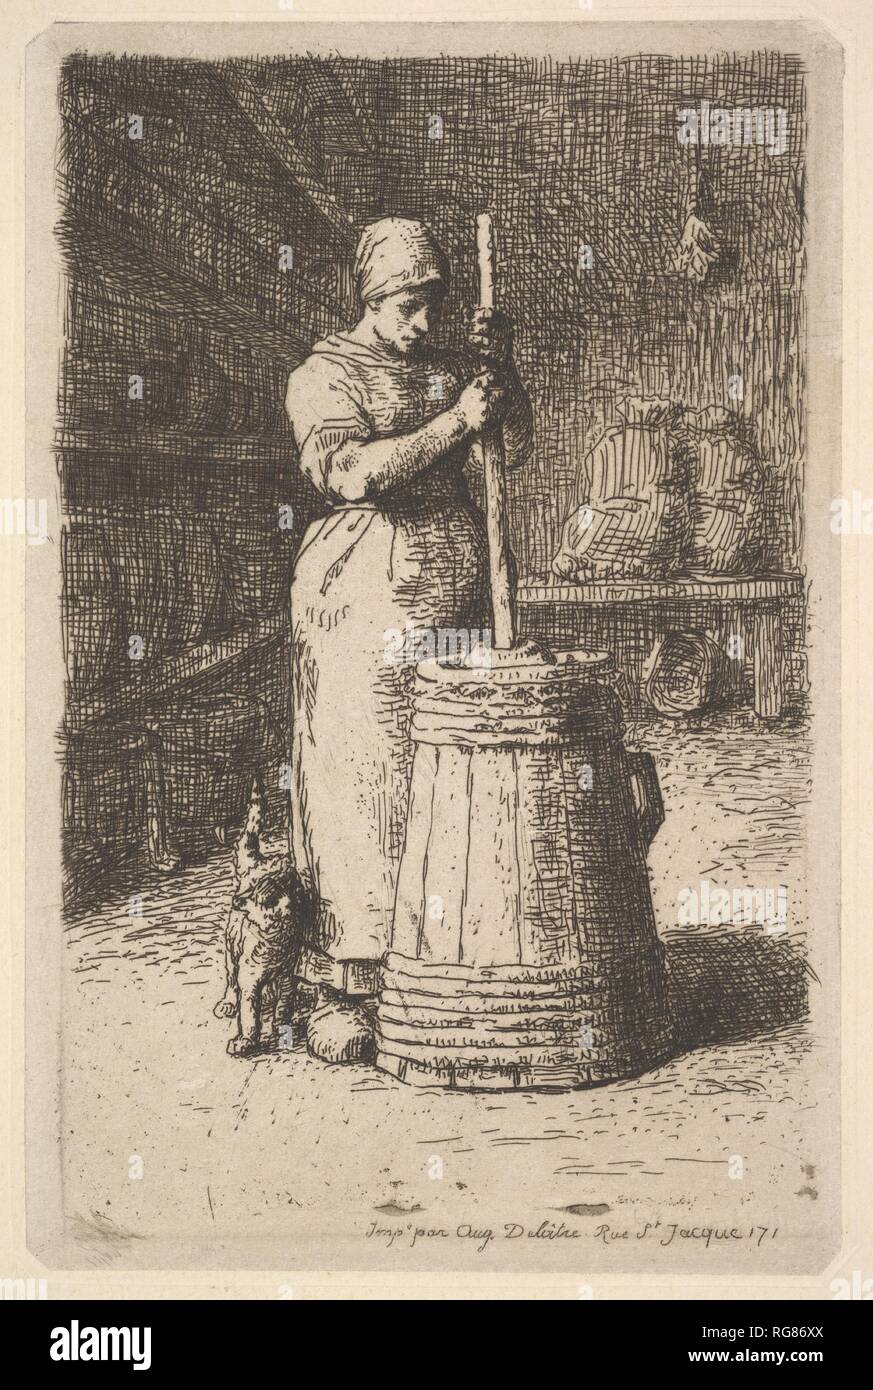 Woman Churning Butter. Artist: Jean-François Millet (French, Gruchy 1814-1875 Barbizon). Dimensions: plate: 7 3/16 x 4 3/4 in. (18.2 x 12 cm)  sheet: 12 5/8 x 9 3/4 in. (32.1 x 24.8 cm). Date: 1855-56. Museum: Metropolitan Museum of Art, New York, USA. Stock Photo